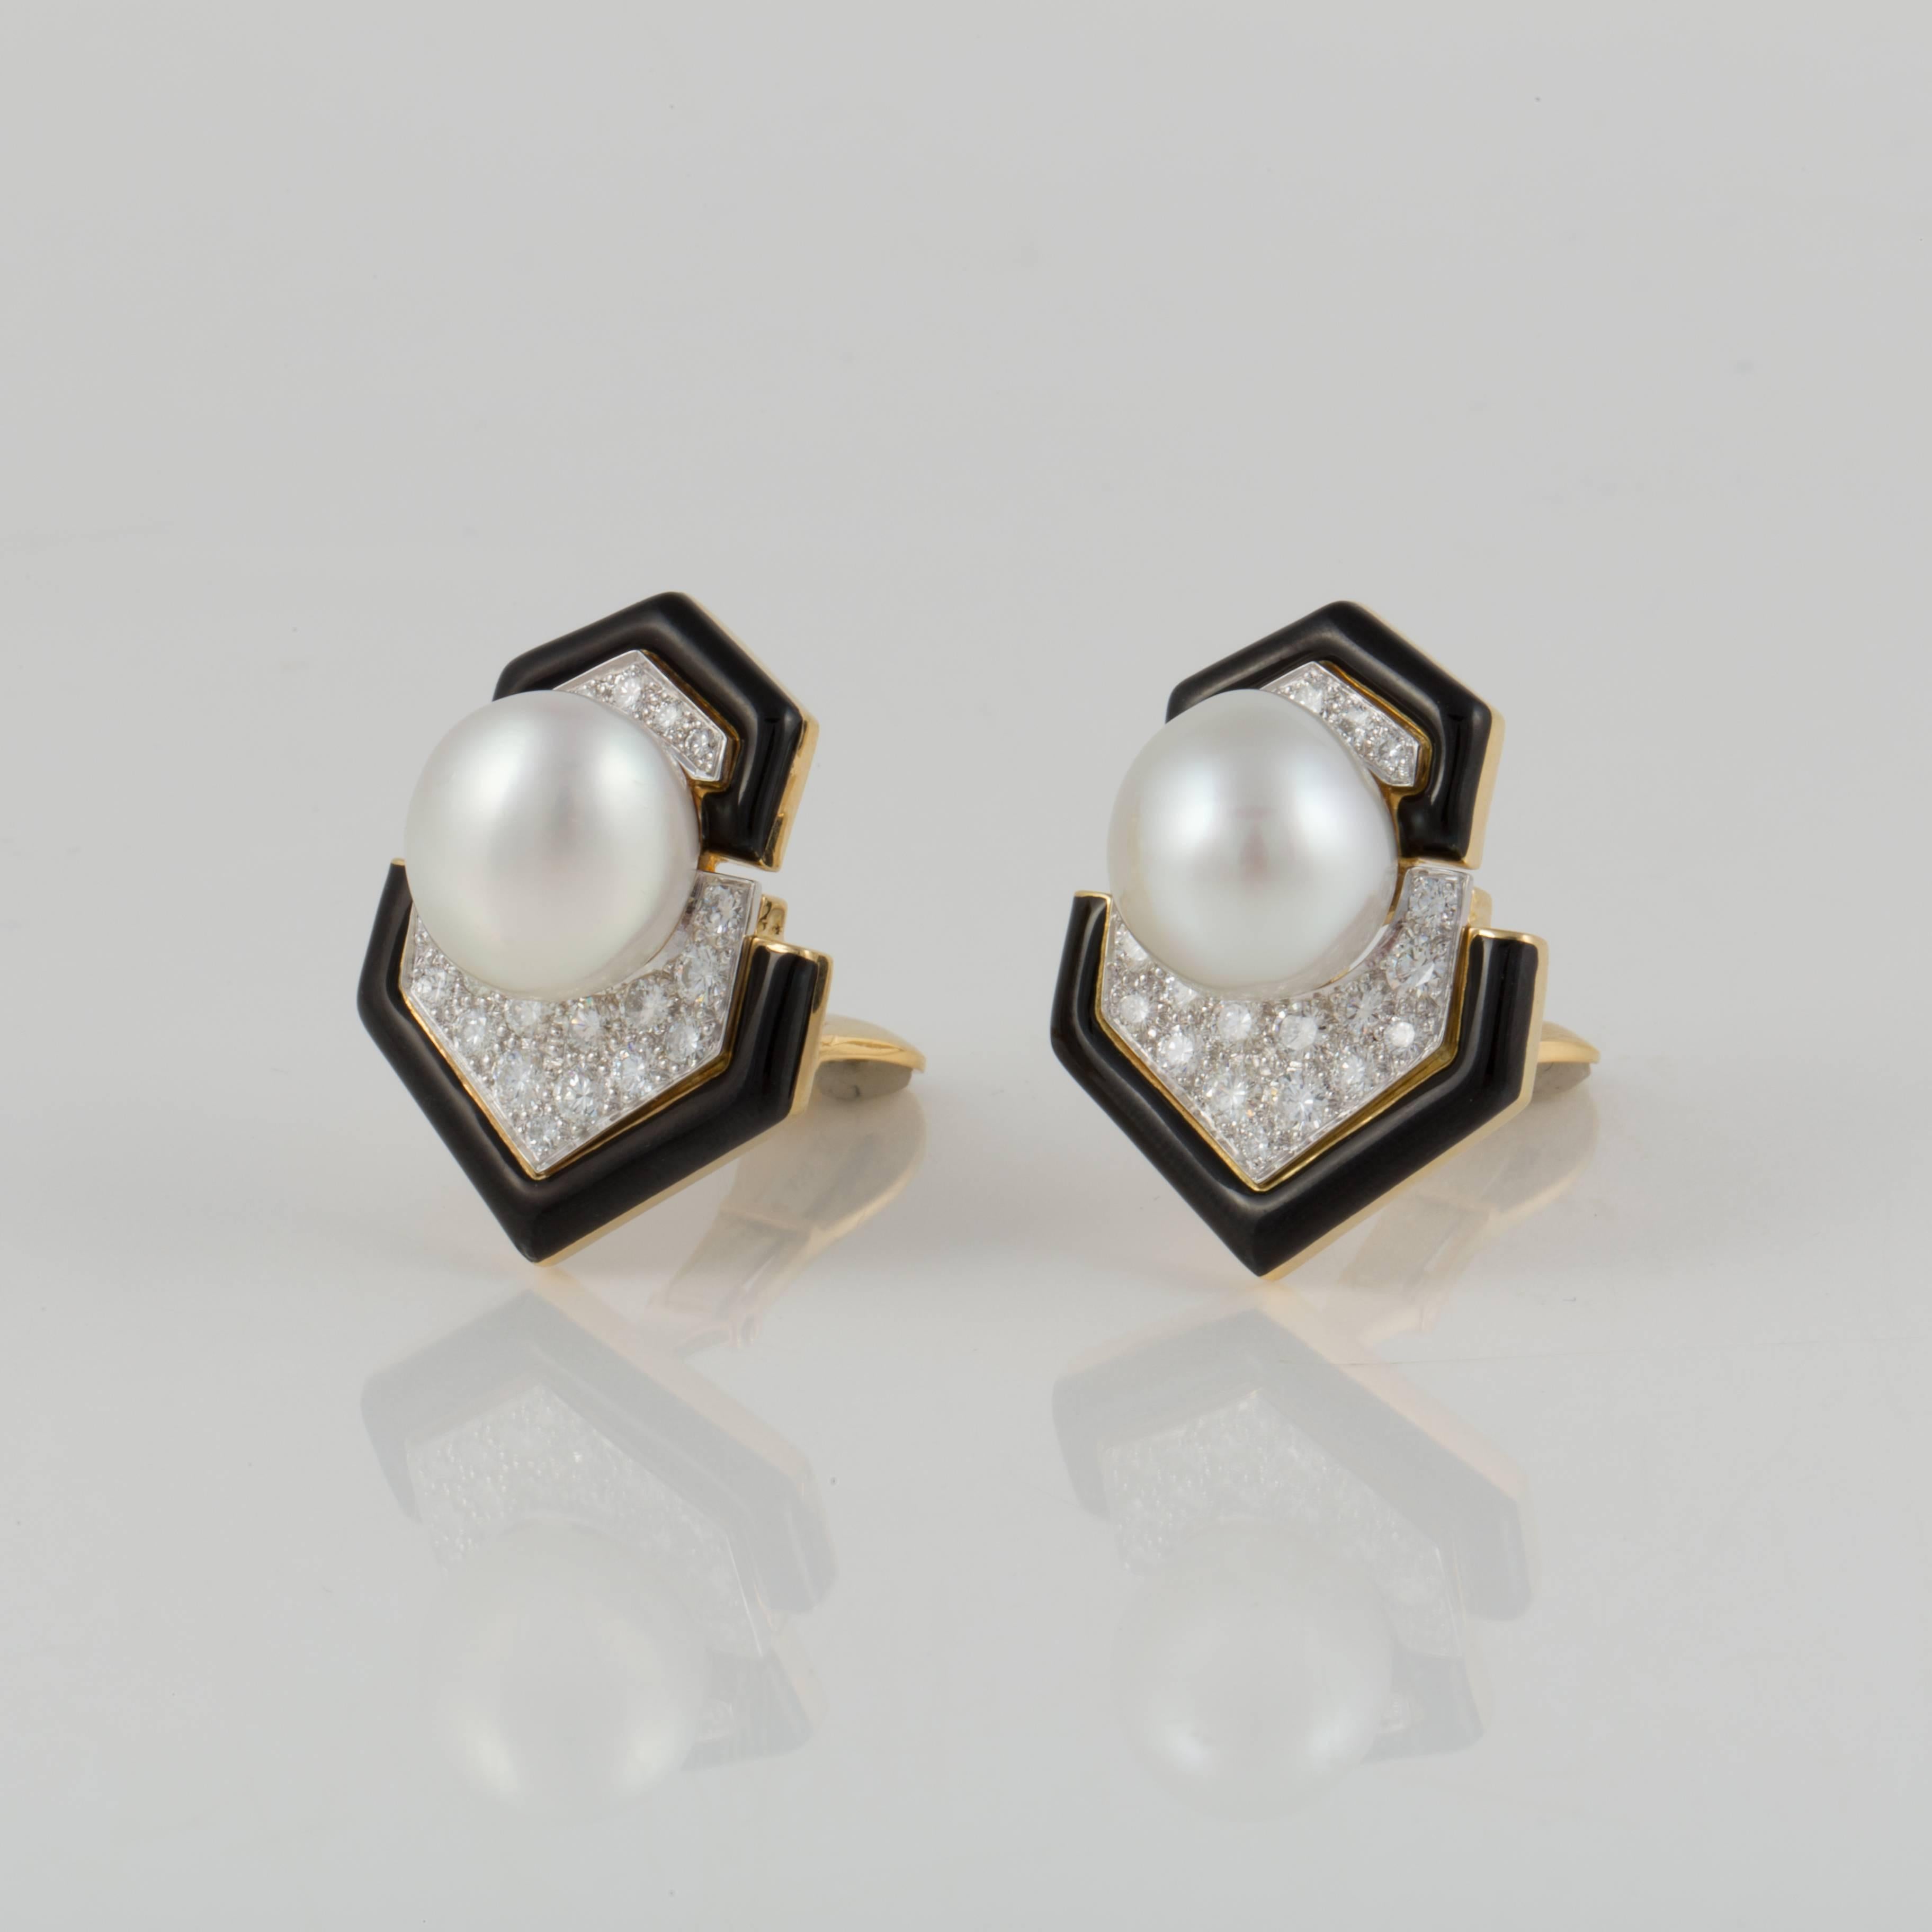 David Webb earrings composed of 18K yellow gold, black enamel, pearls and diamonds set in platinum.  These classic earrings are marked 